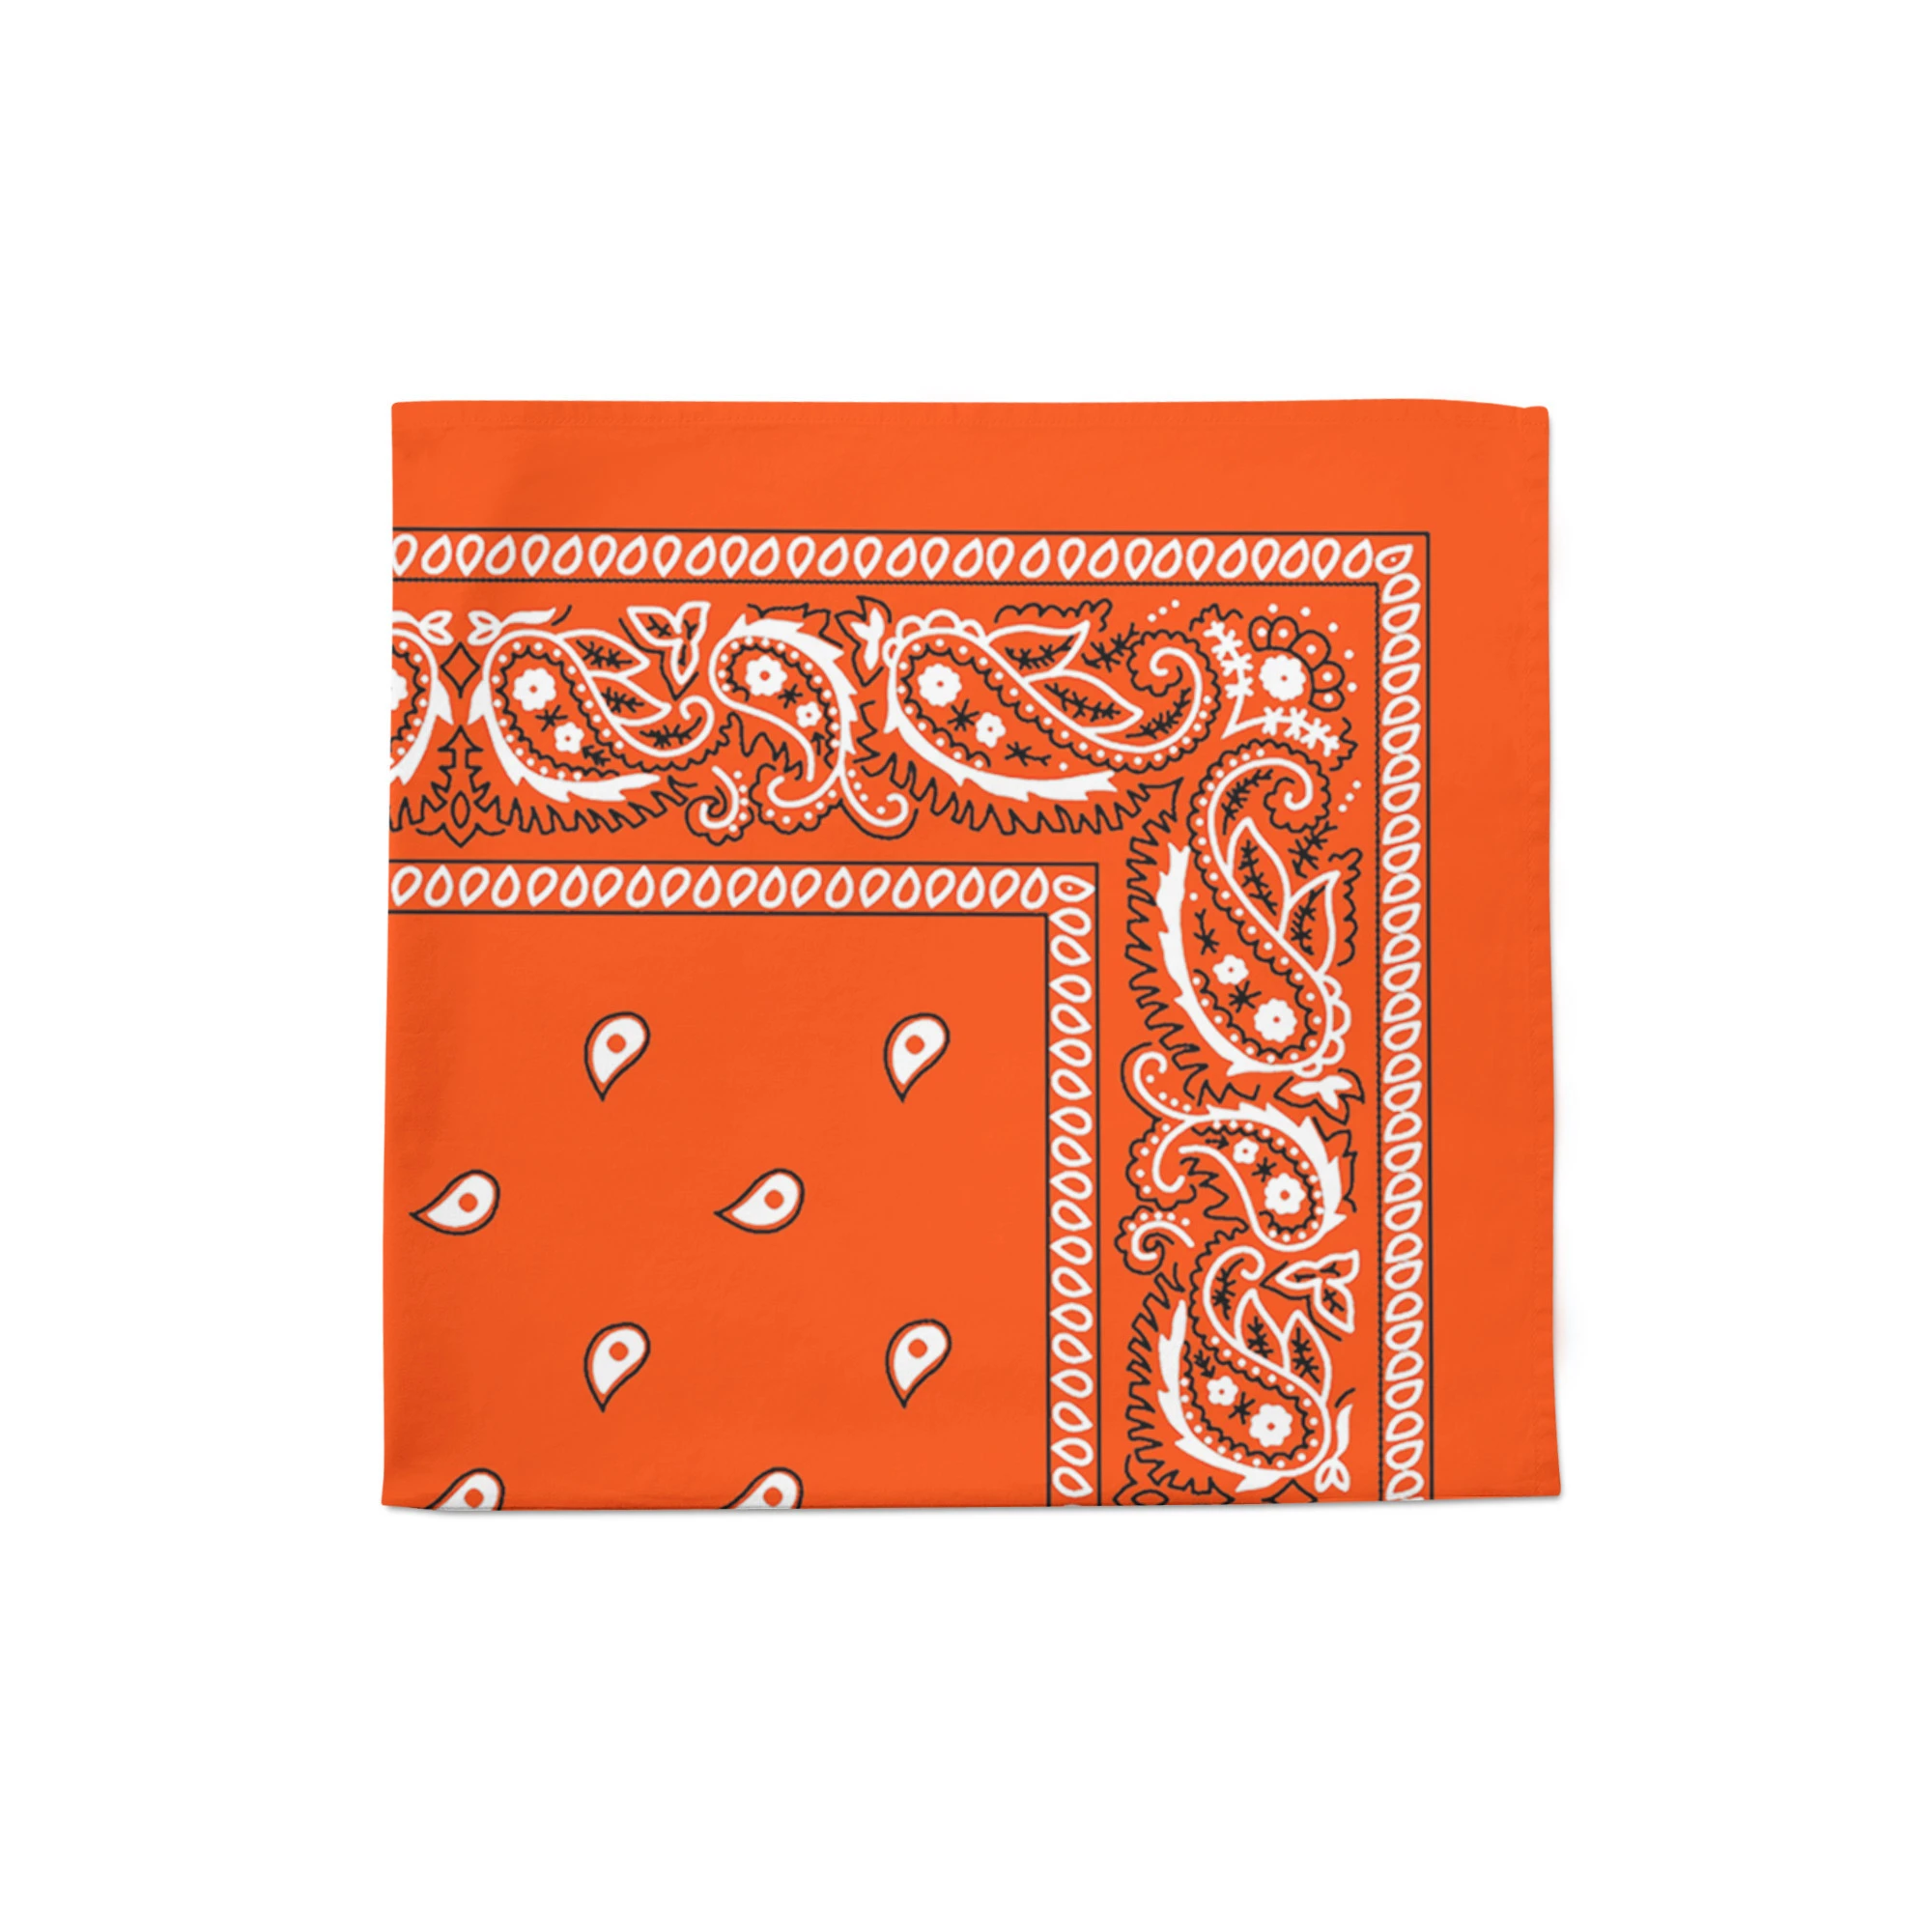 Paisley Polyester XL Bandana 27 inches Sold in Units Multi Uses Face Covering Napkins Handkerchief Scarf